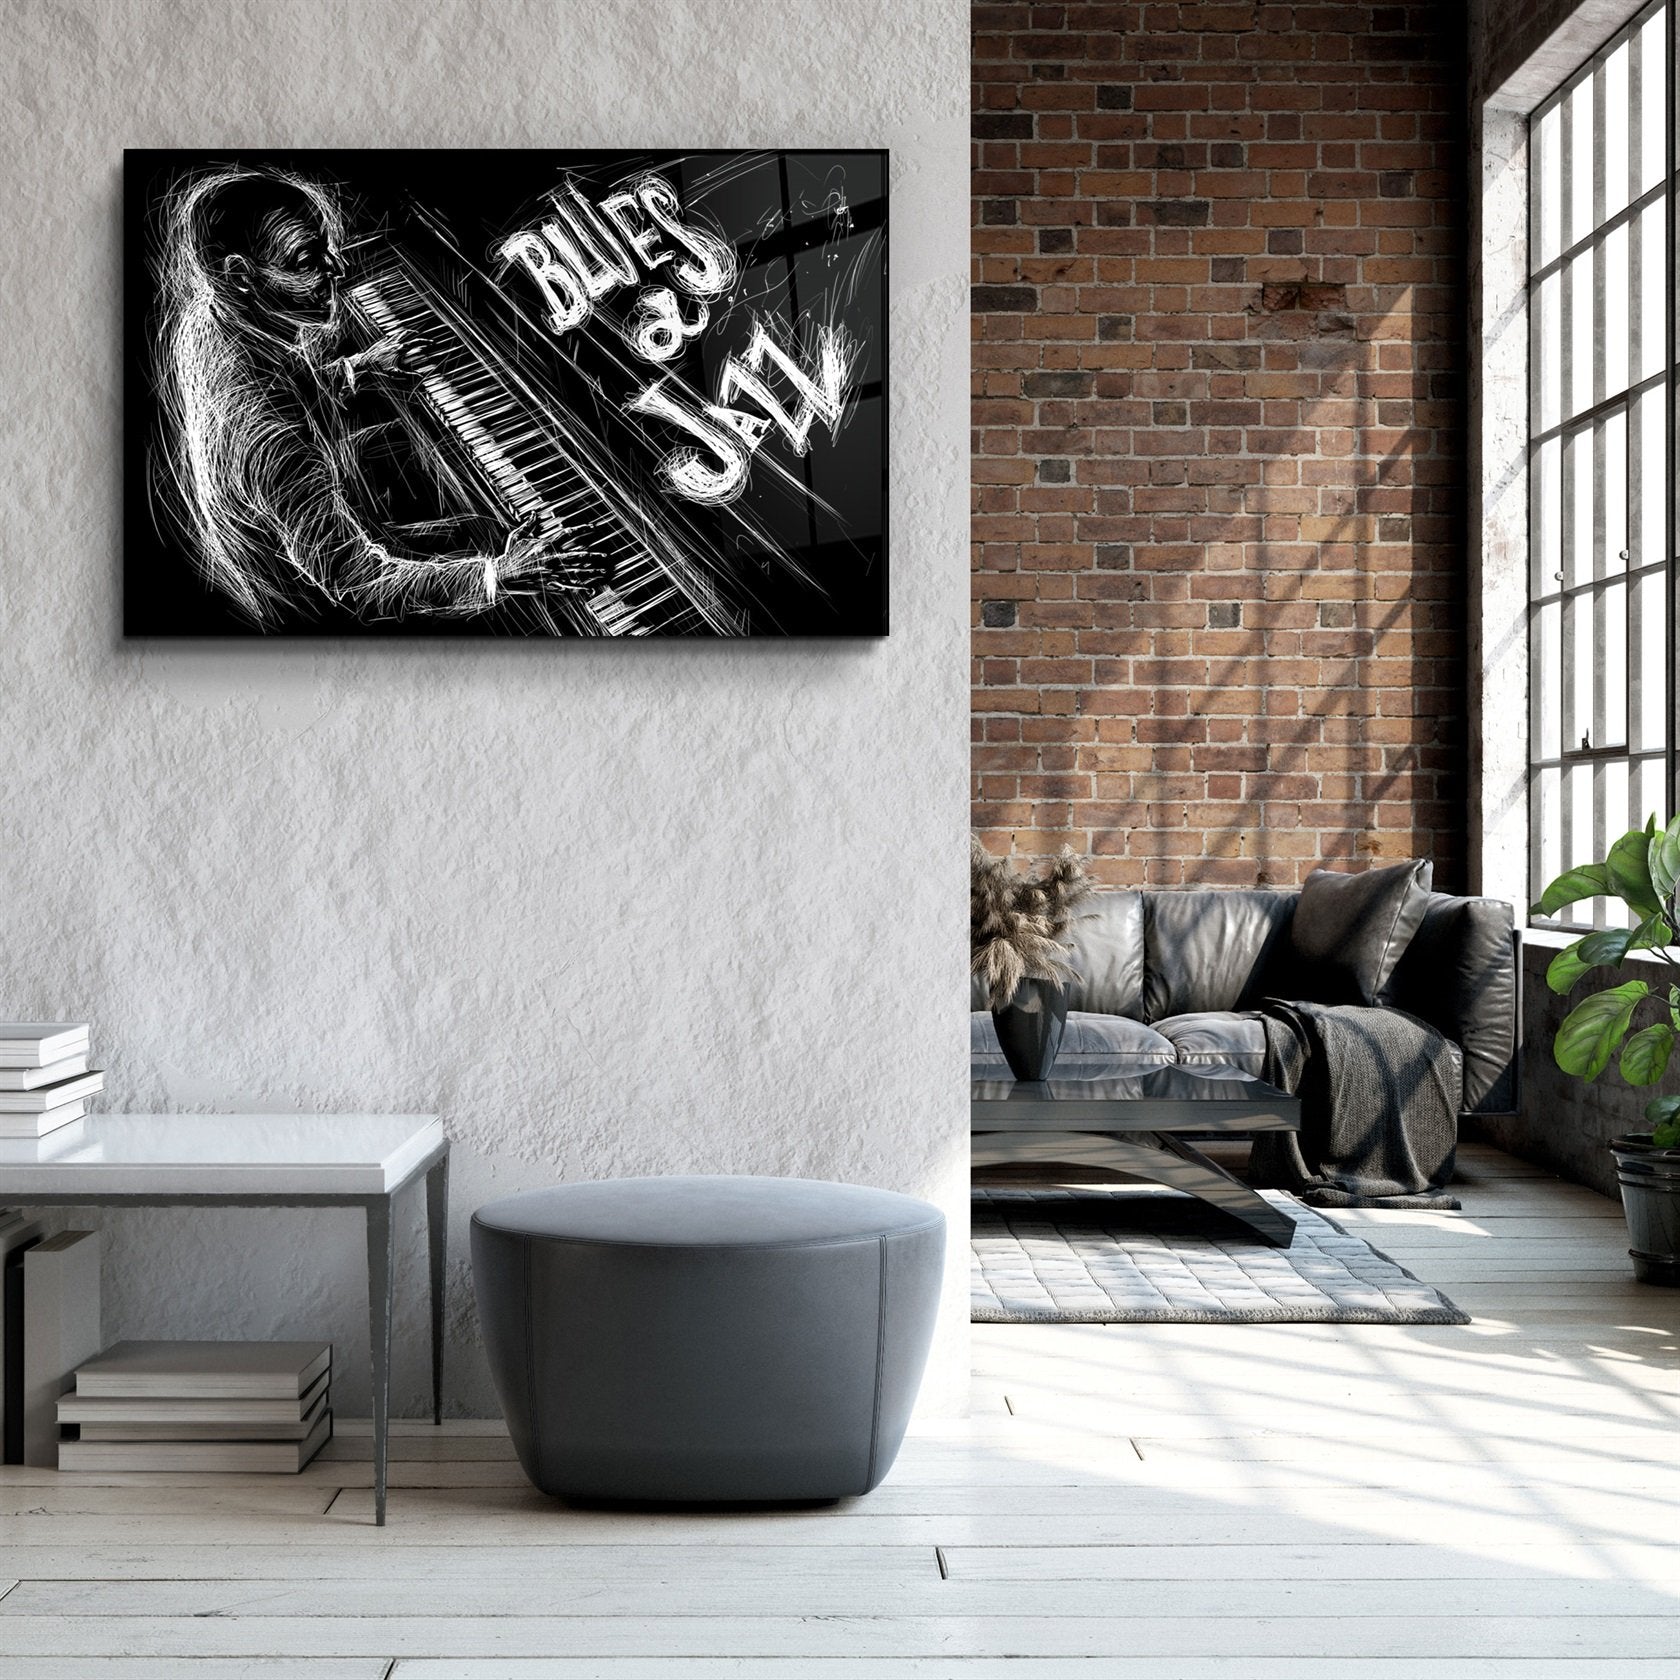 ・"Only Jazz"・Glass Wall Art